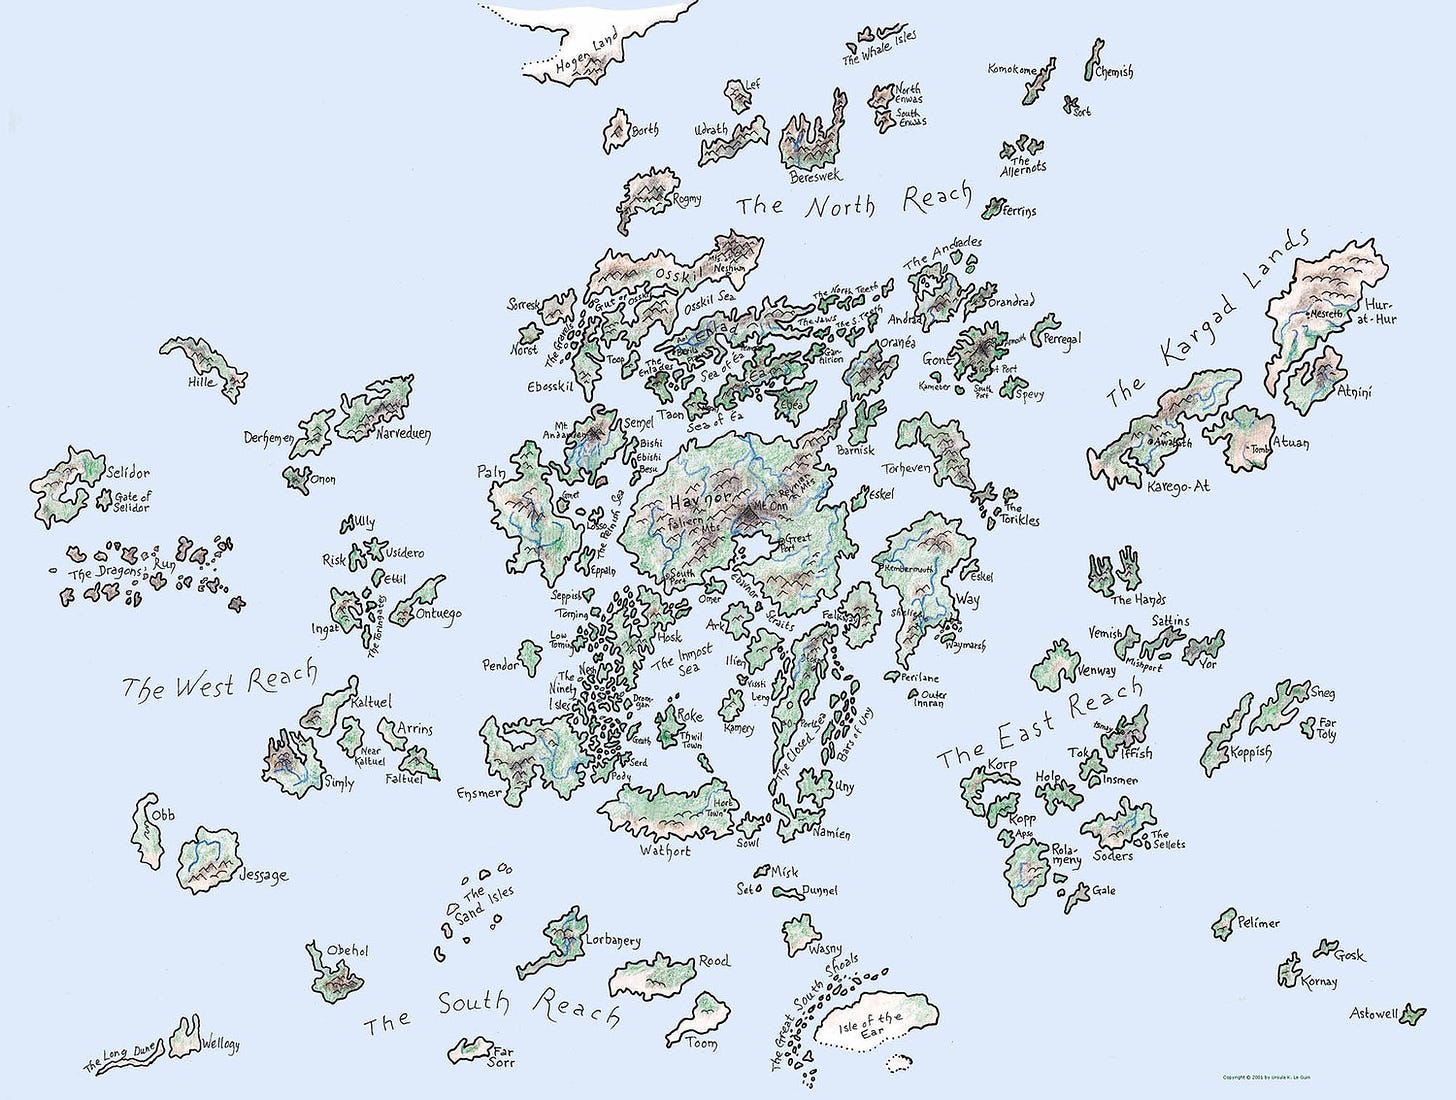 Overview map of the disparate islands that comprise the world of Earthsea against a flat blue expanse.